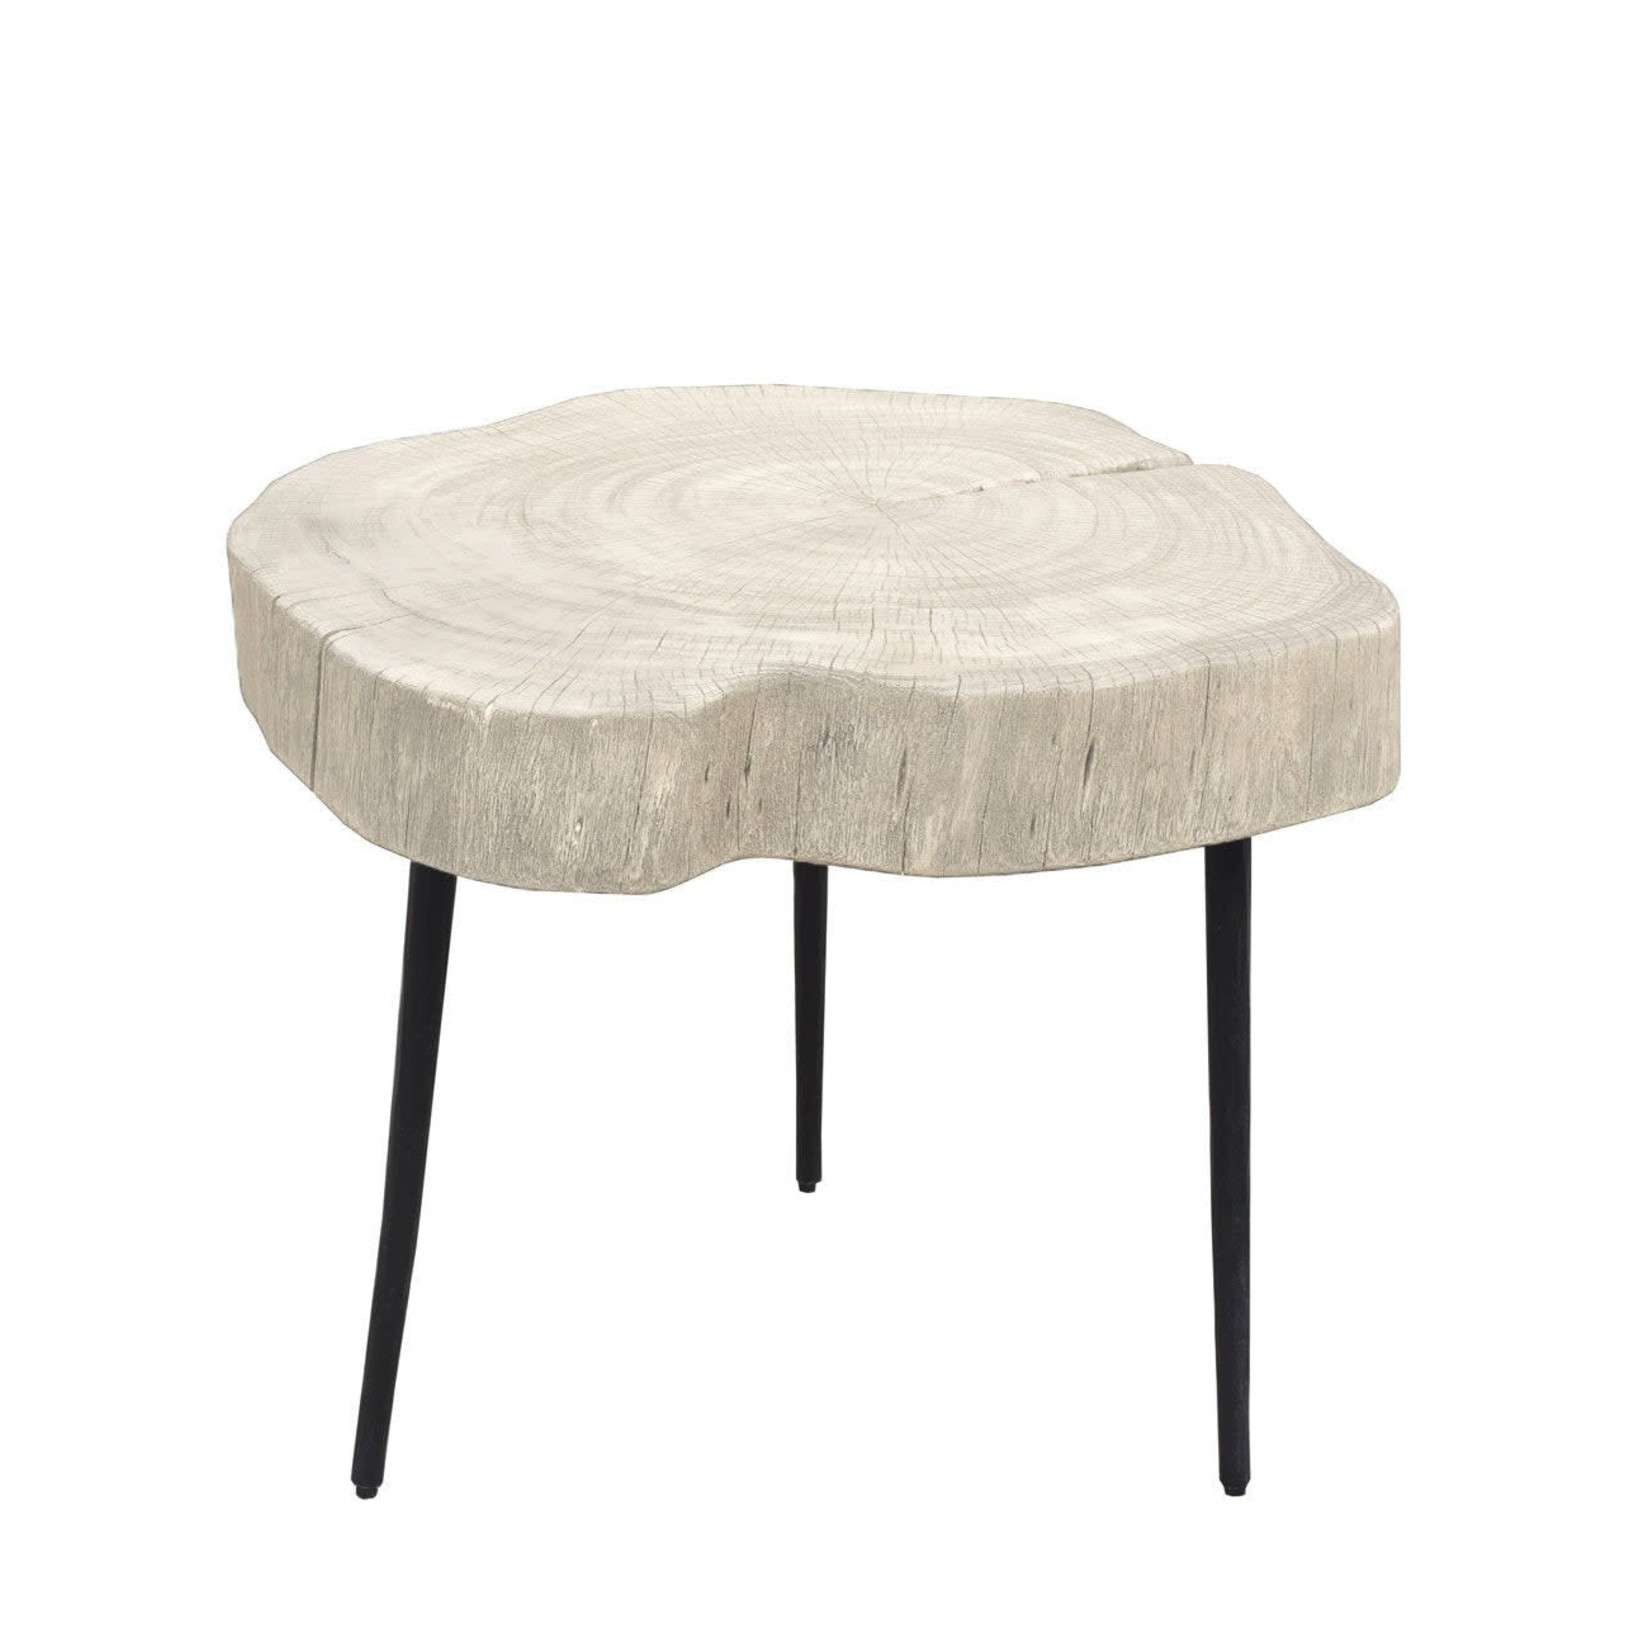 Side Table - Organic Trunk White Washed